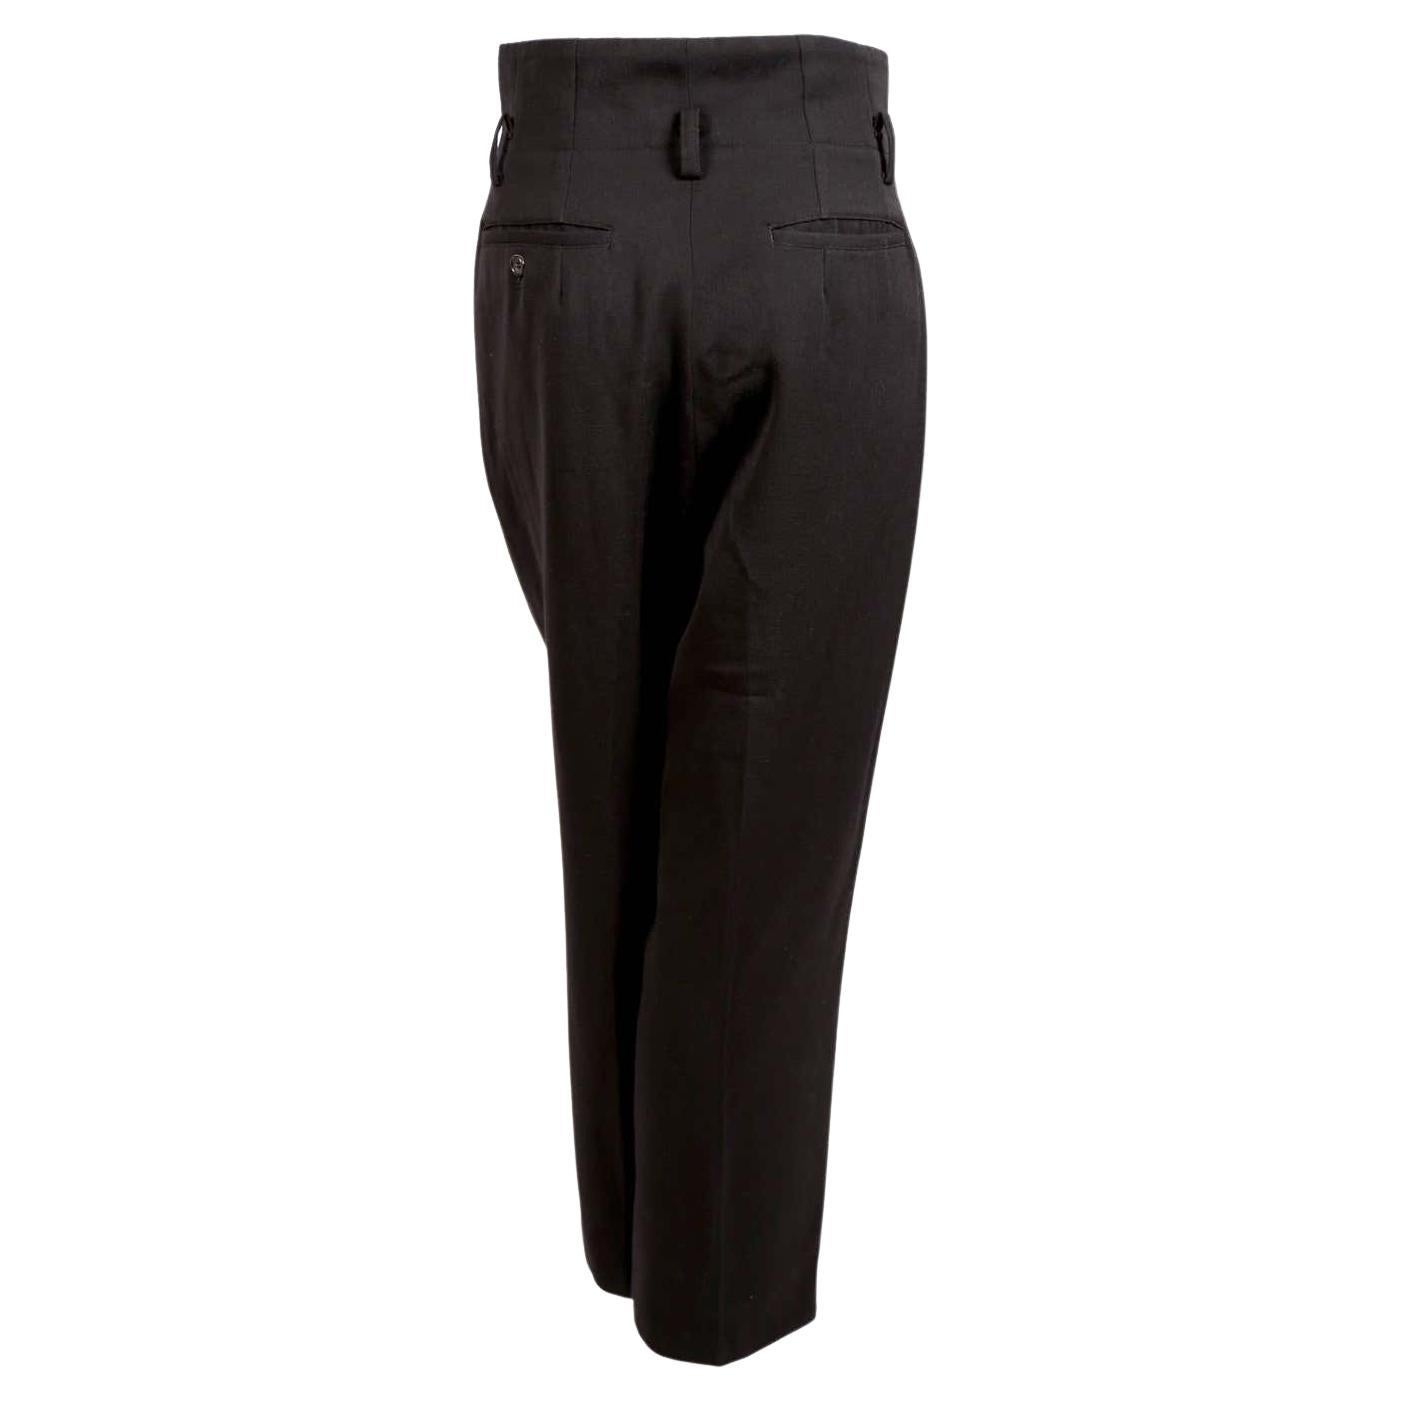 Women's or Men's 1988 COMME DES GARCONS pleated black wool pants with silk satin waistband